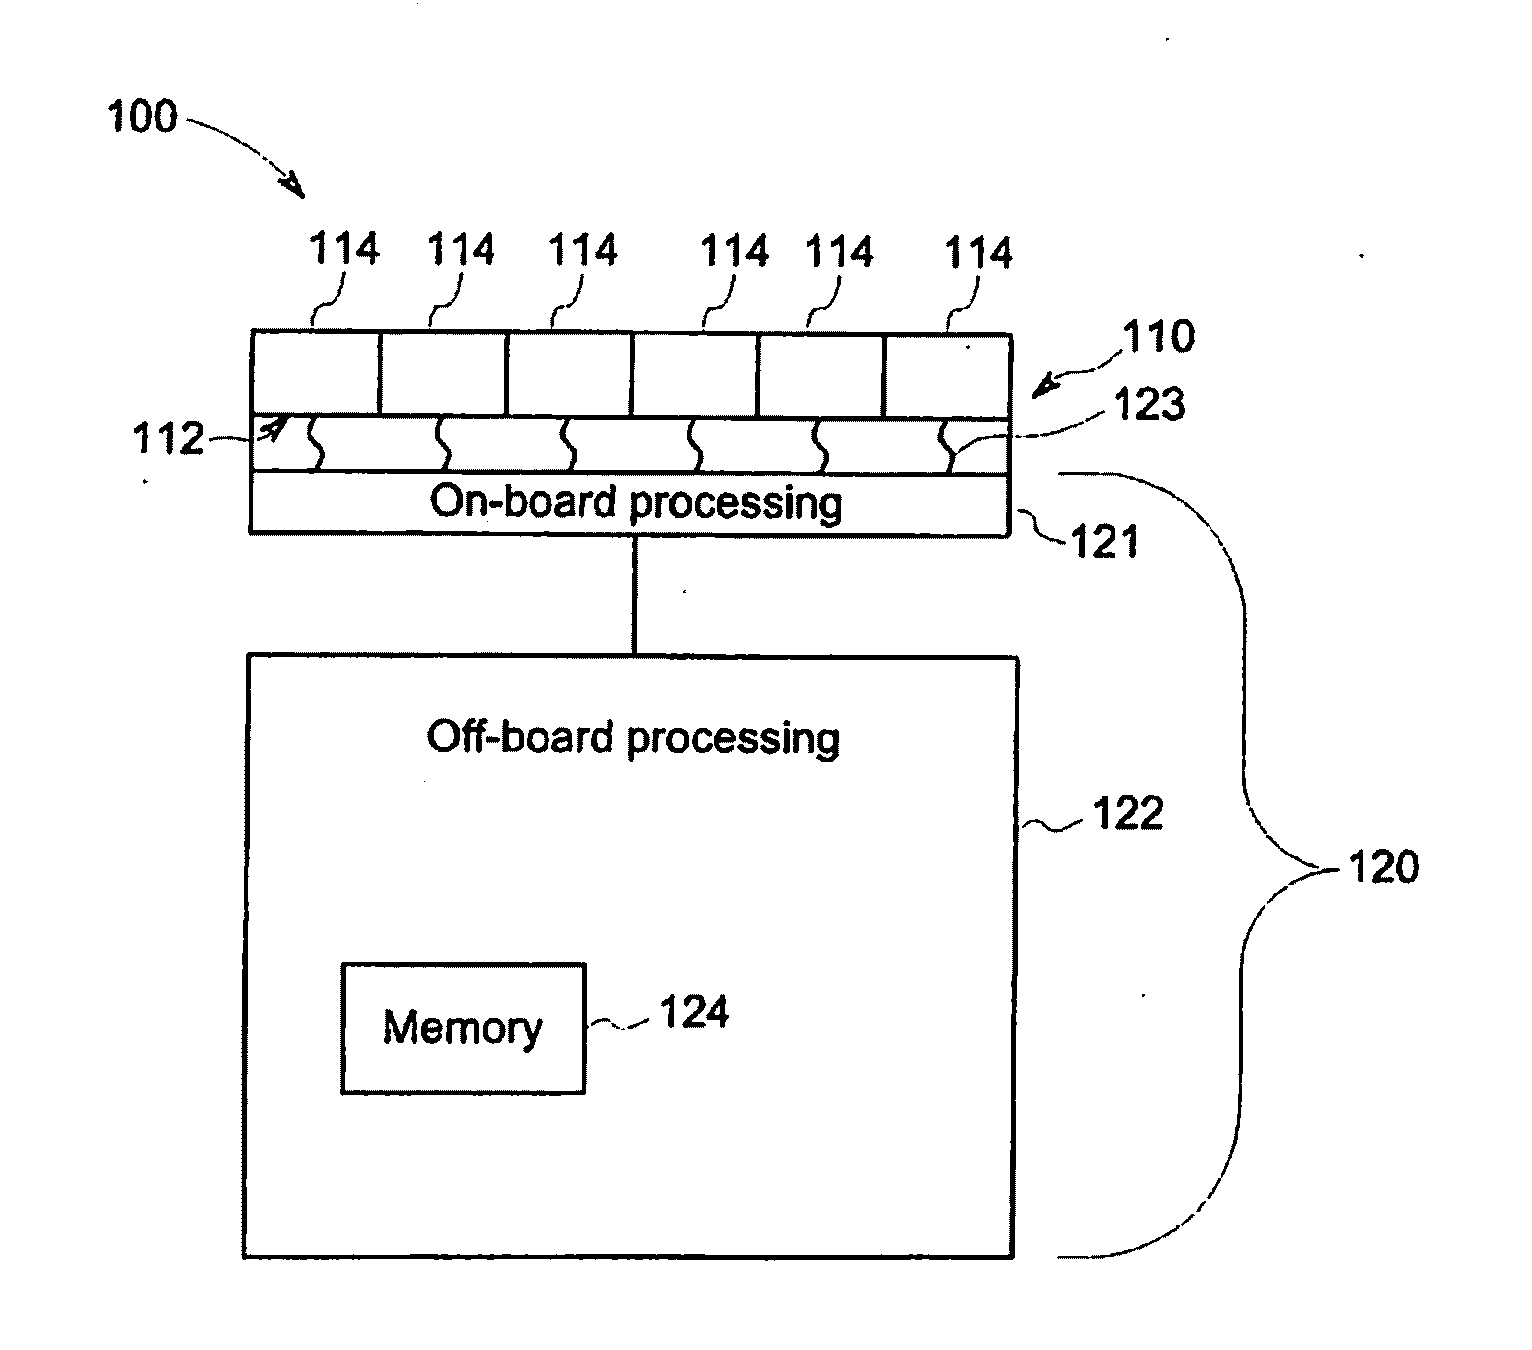 Systems and methods for sub-pixel location determination